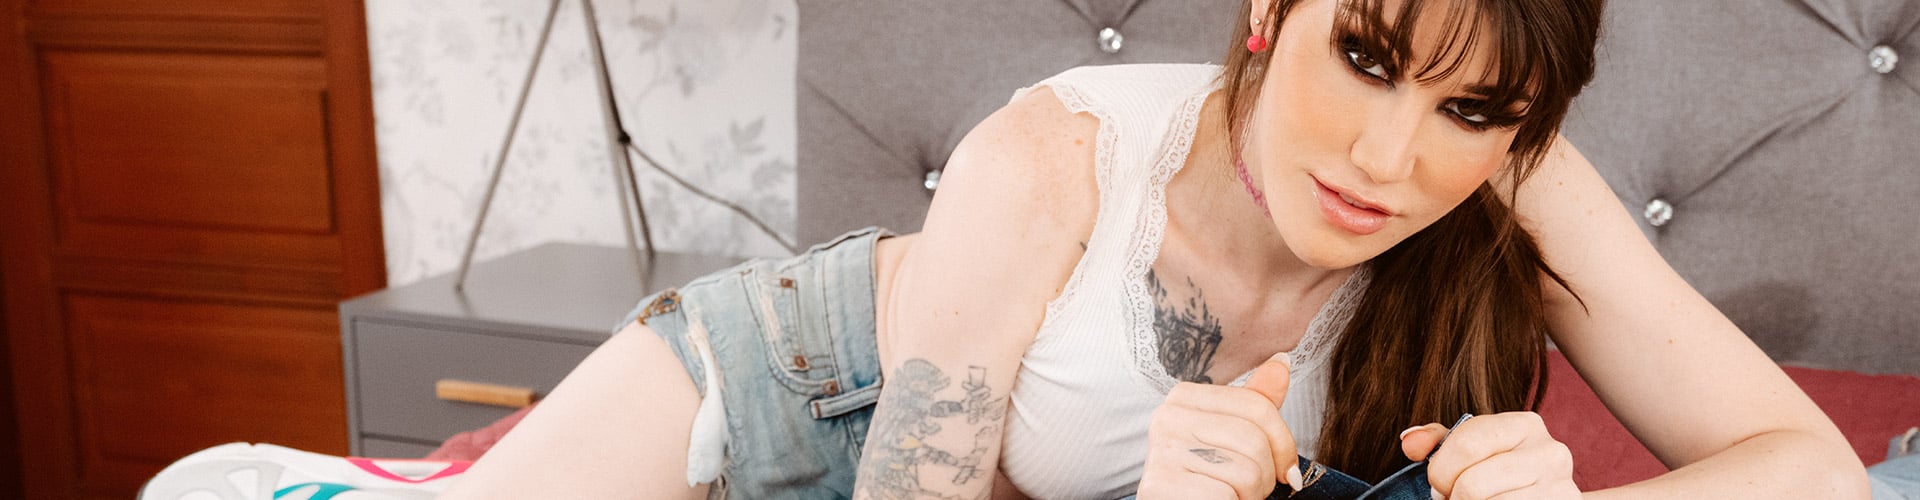 Bedroom Sex with Tattooed Hottie in VR Trans